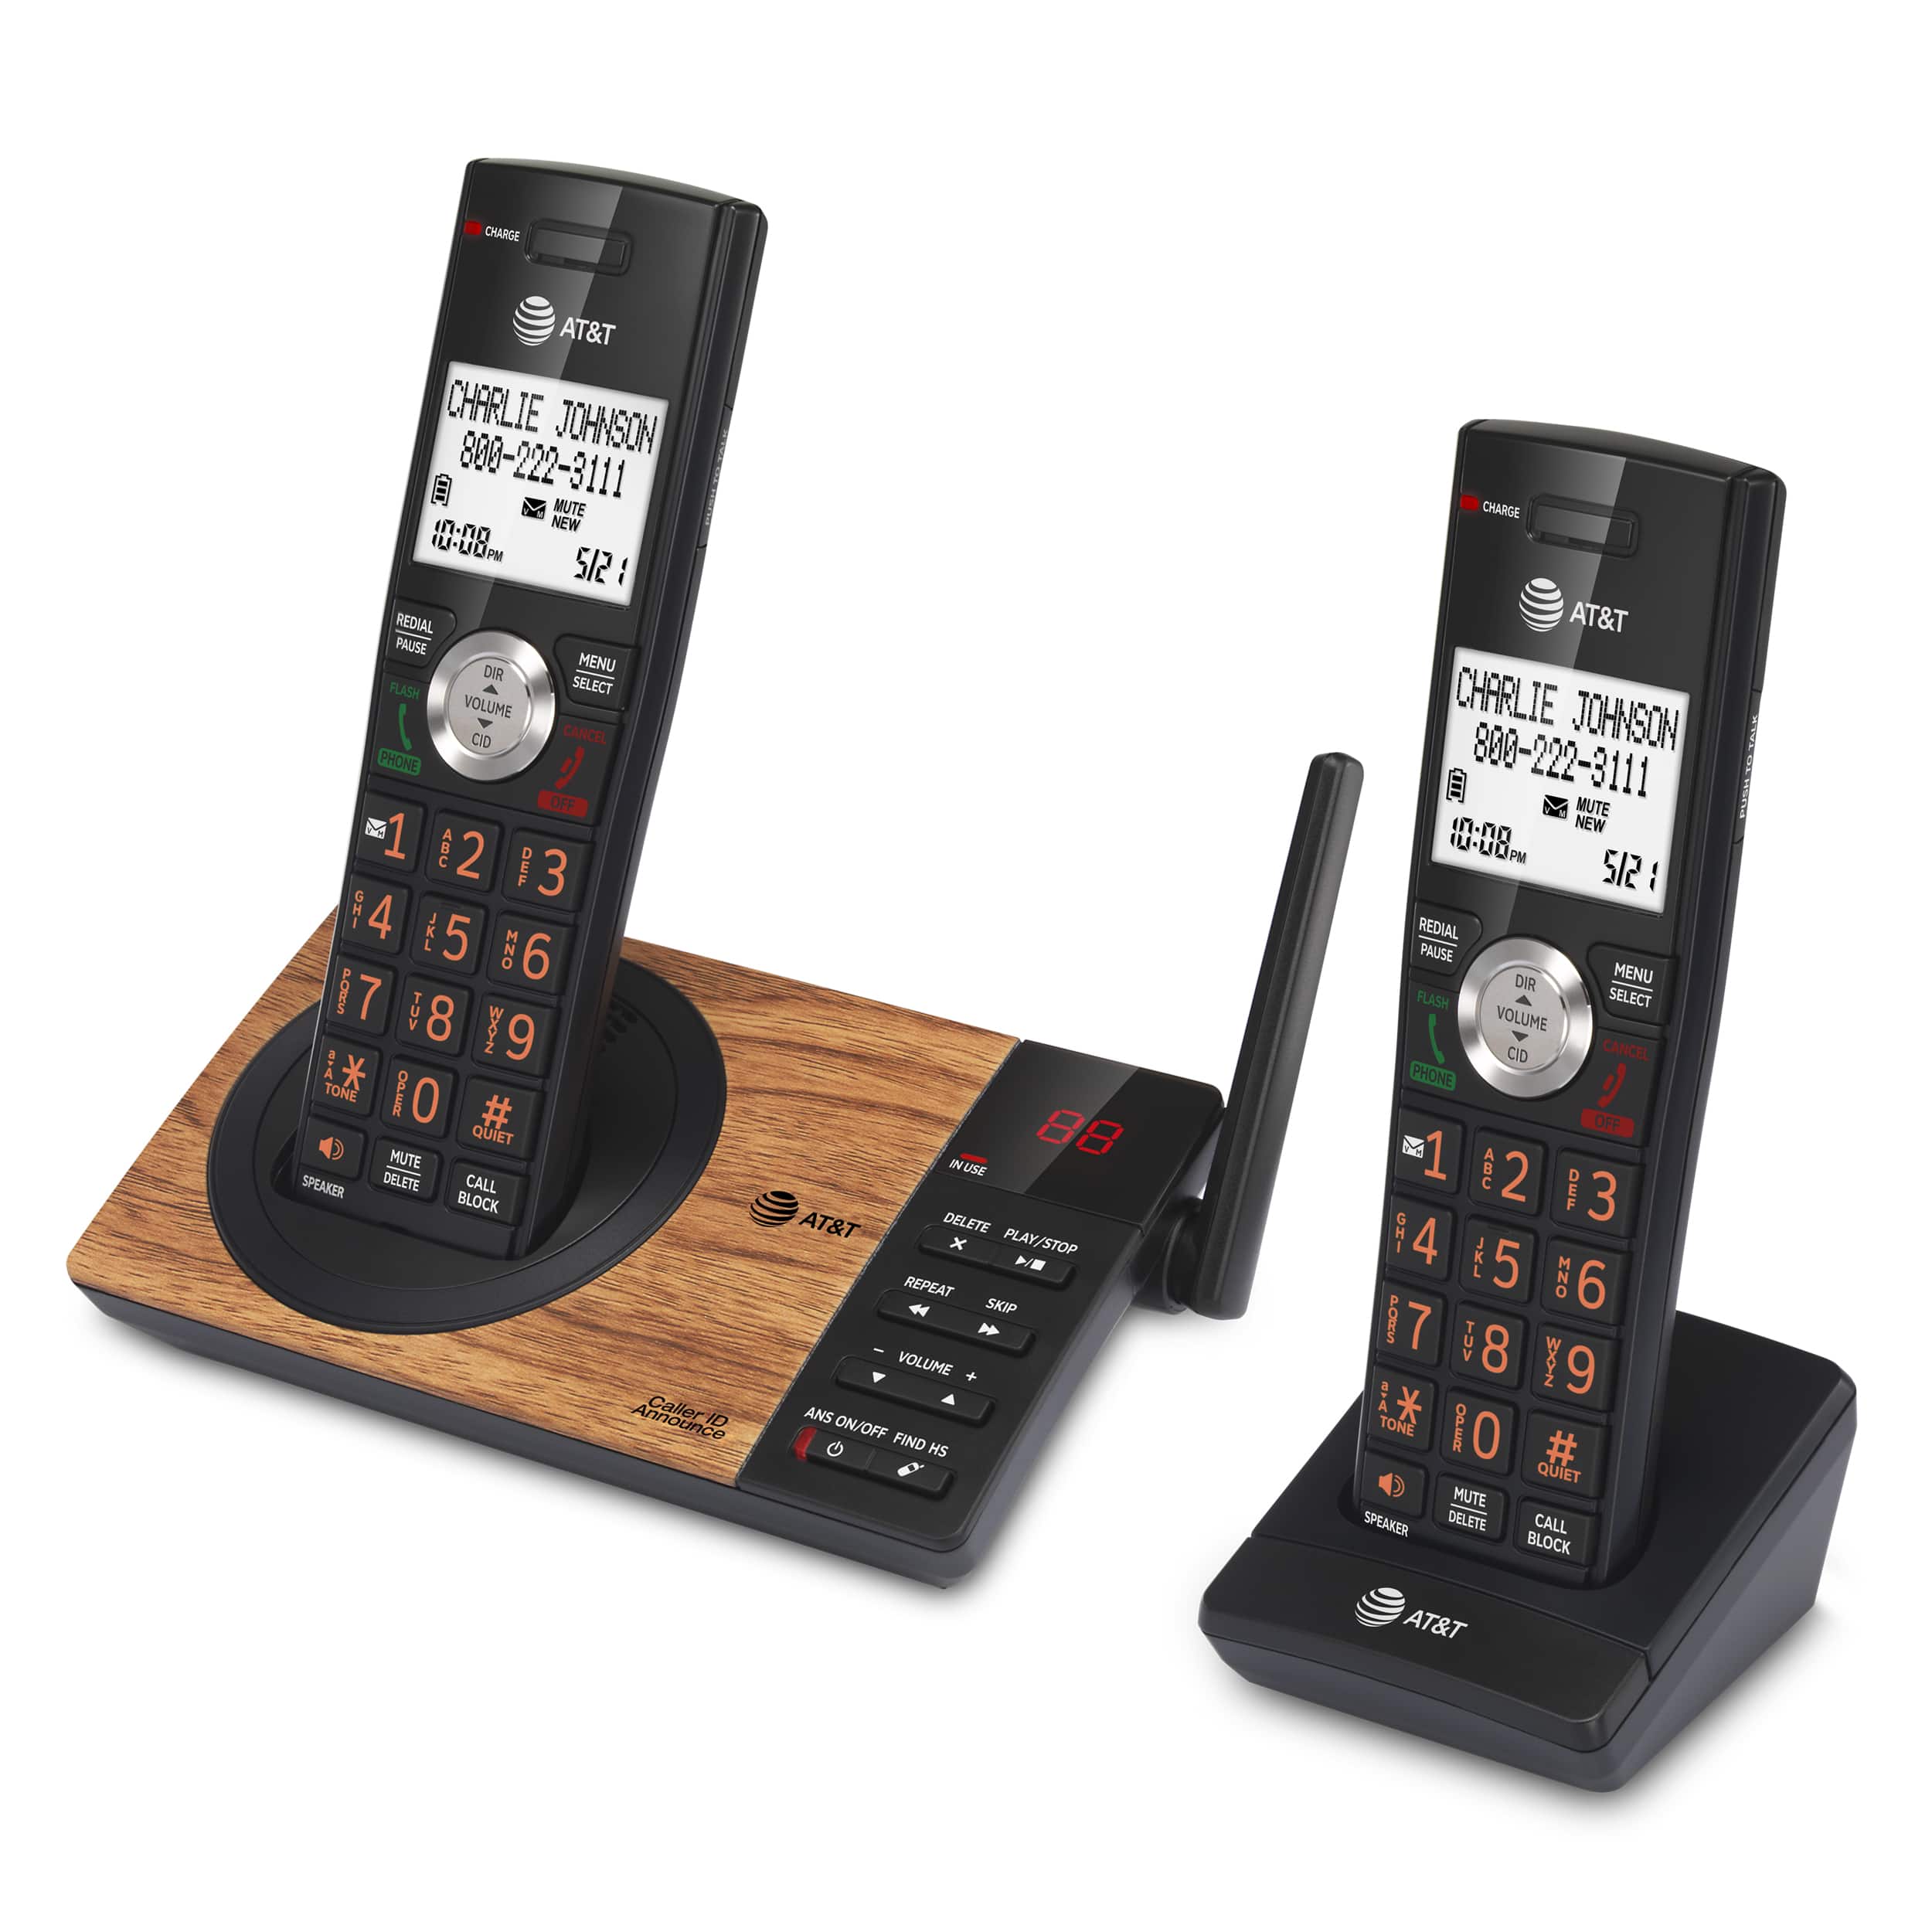 2-Handset Expandable Cordless Phone with Unsurpassed Range, Smart Call Blocker and Answering System - view 3